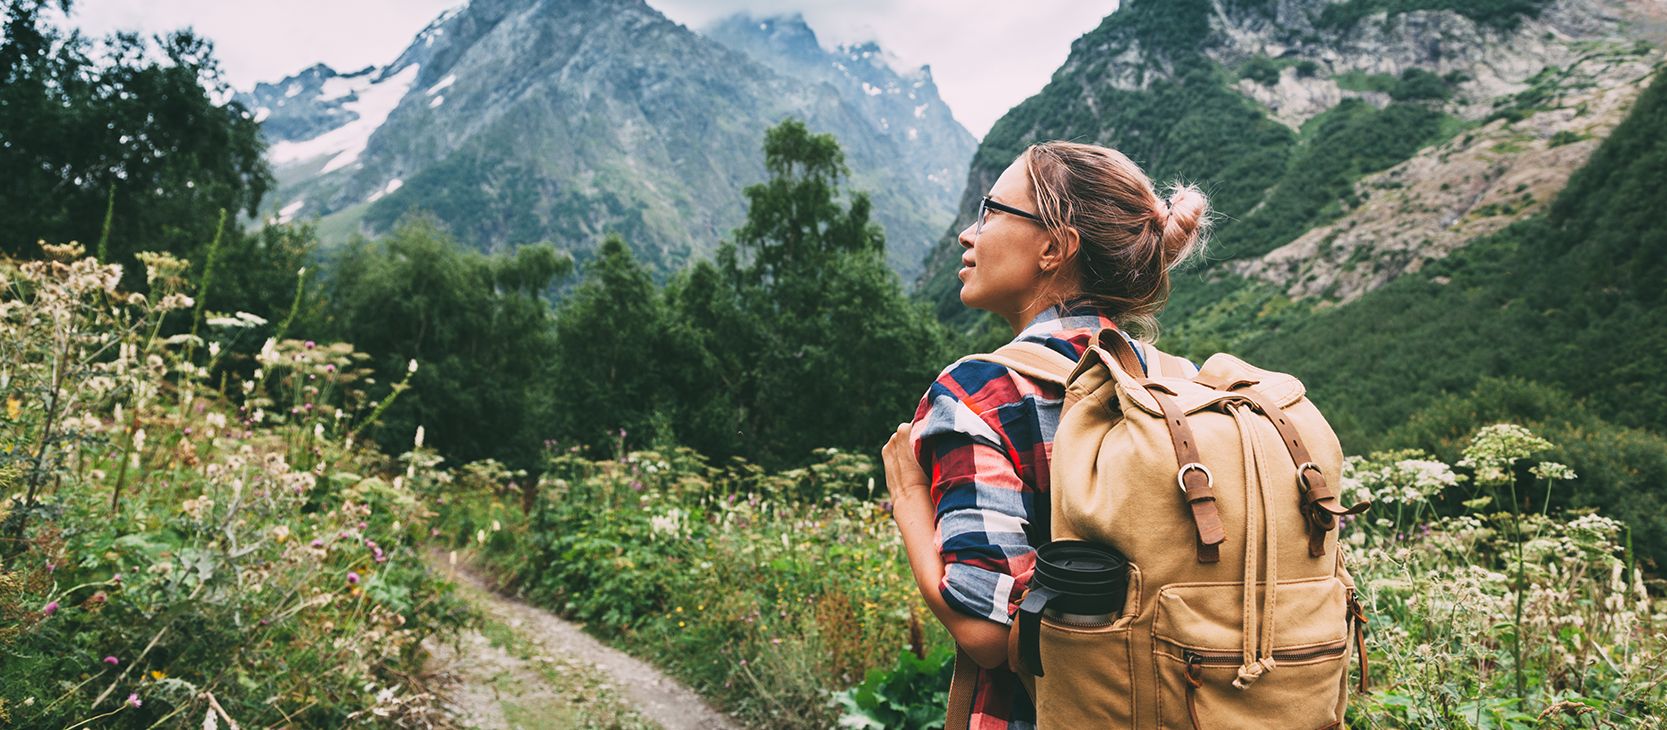 Woman escaping her worries by traveling in a beautiful mountain region